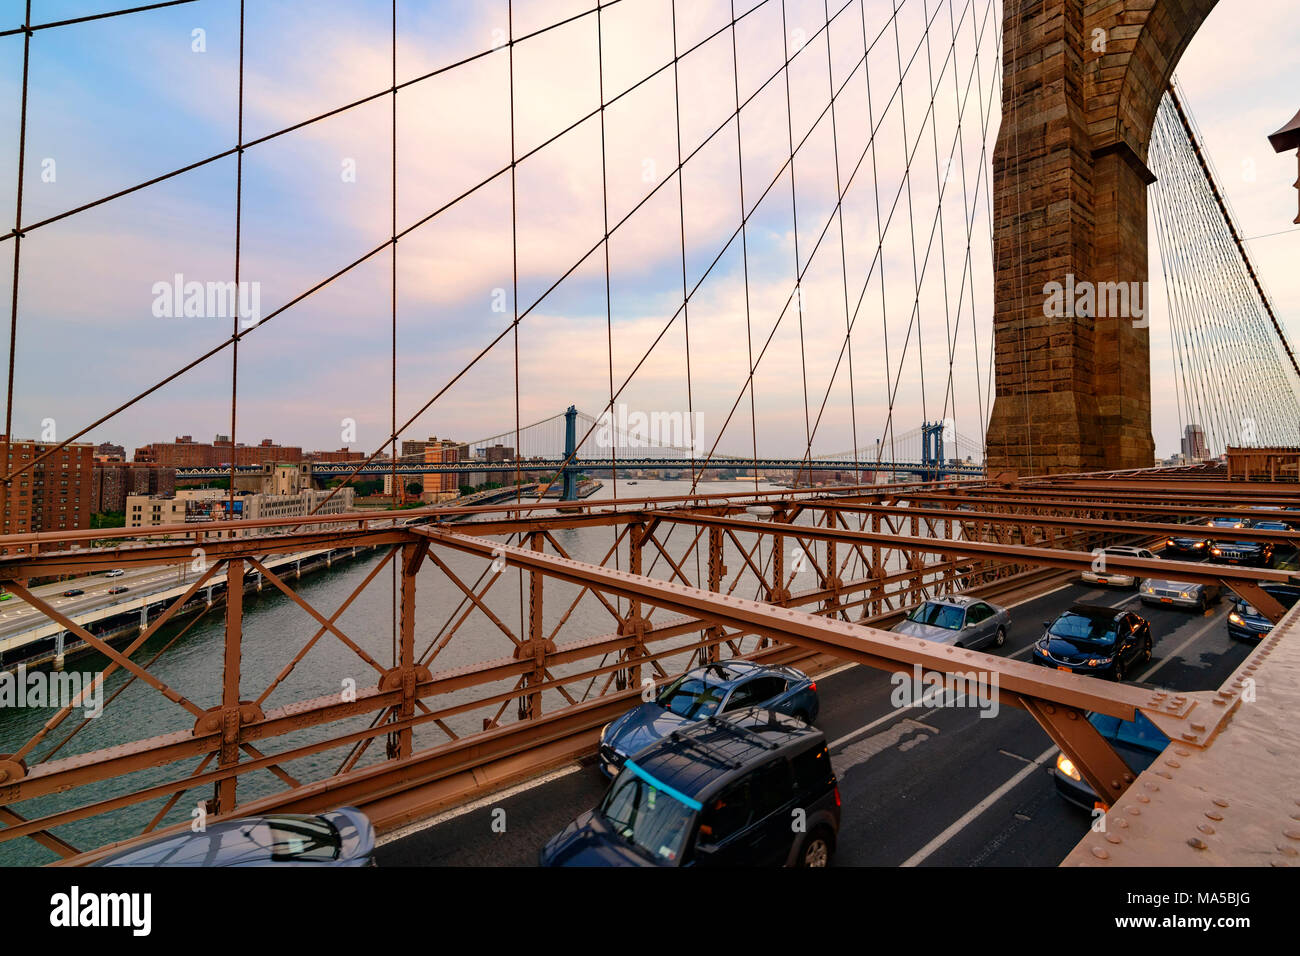 New York City, USA - June 08, 2015: Traffic including a New York Taxi crosses the bridge from Downtown Manhattan in the background toward Brooklyn. Stock Photo